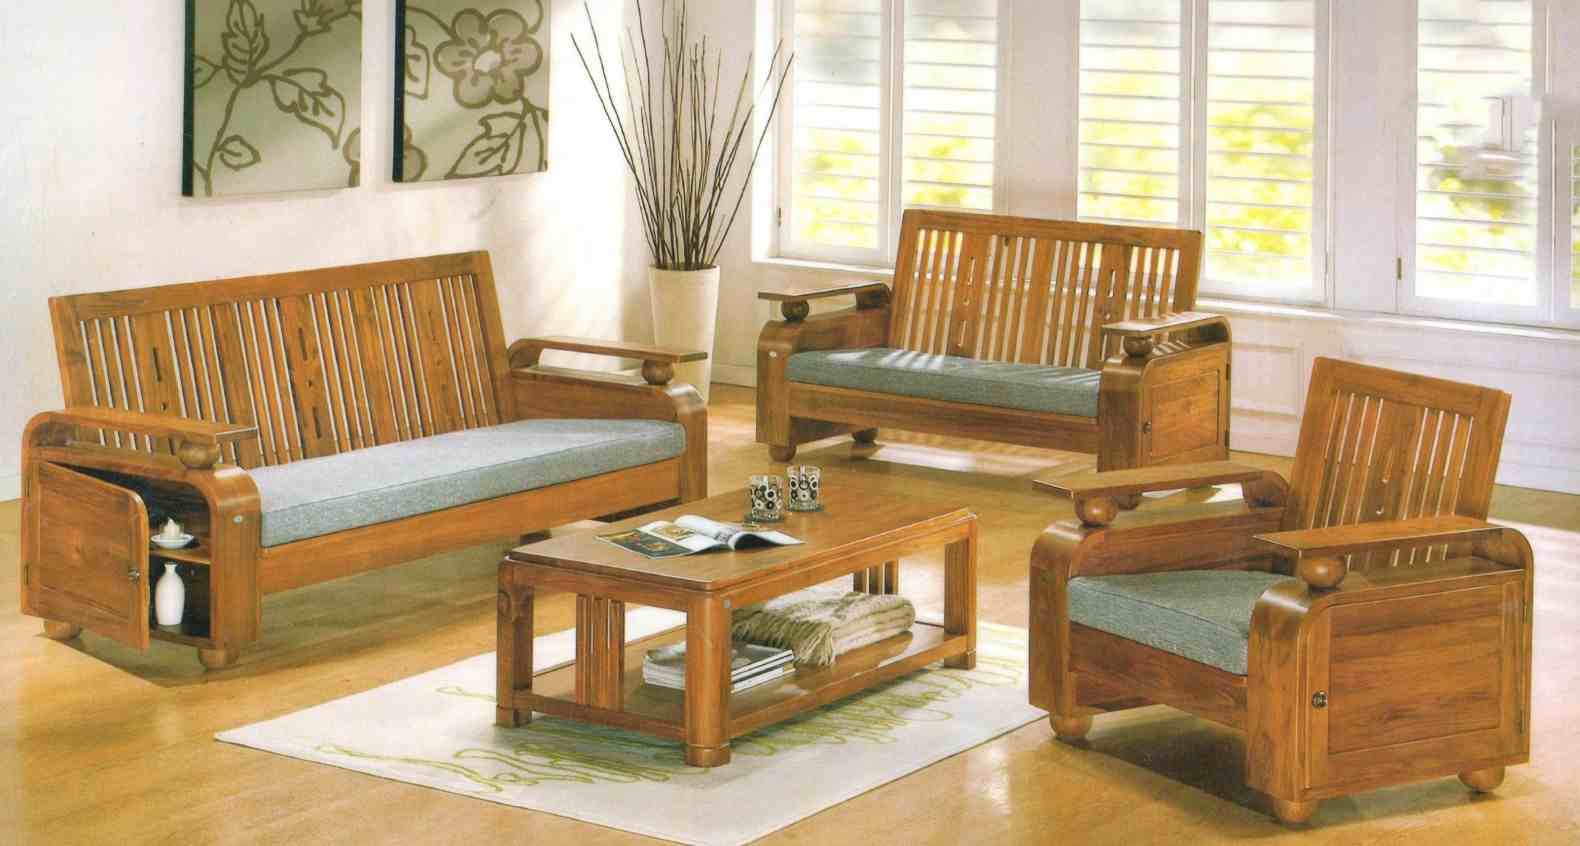  Buy All Kinds of wooden sofa At The Best Price 